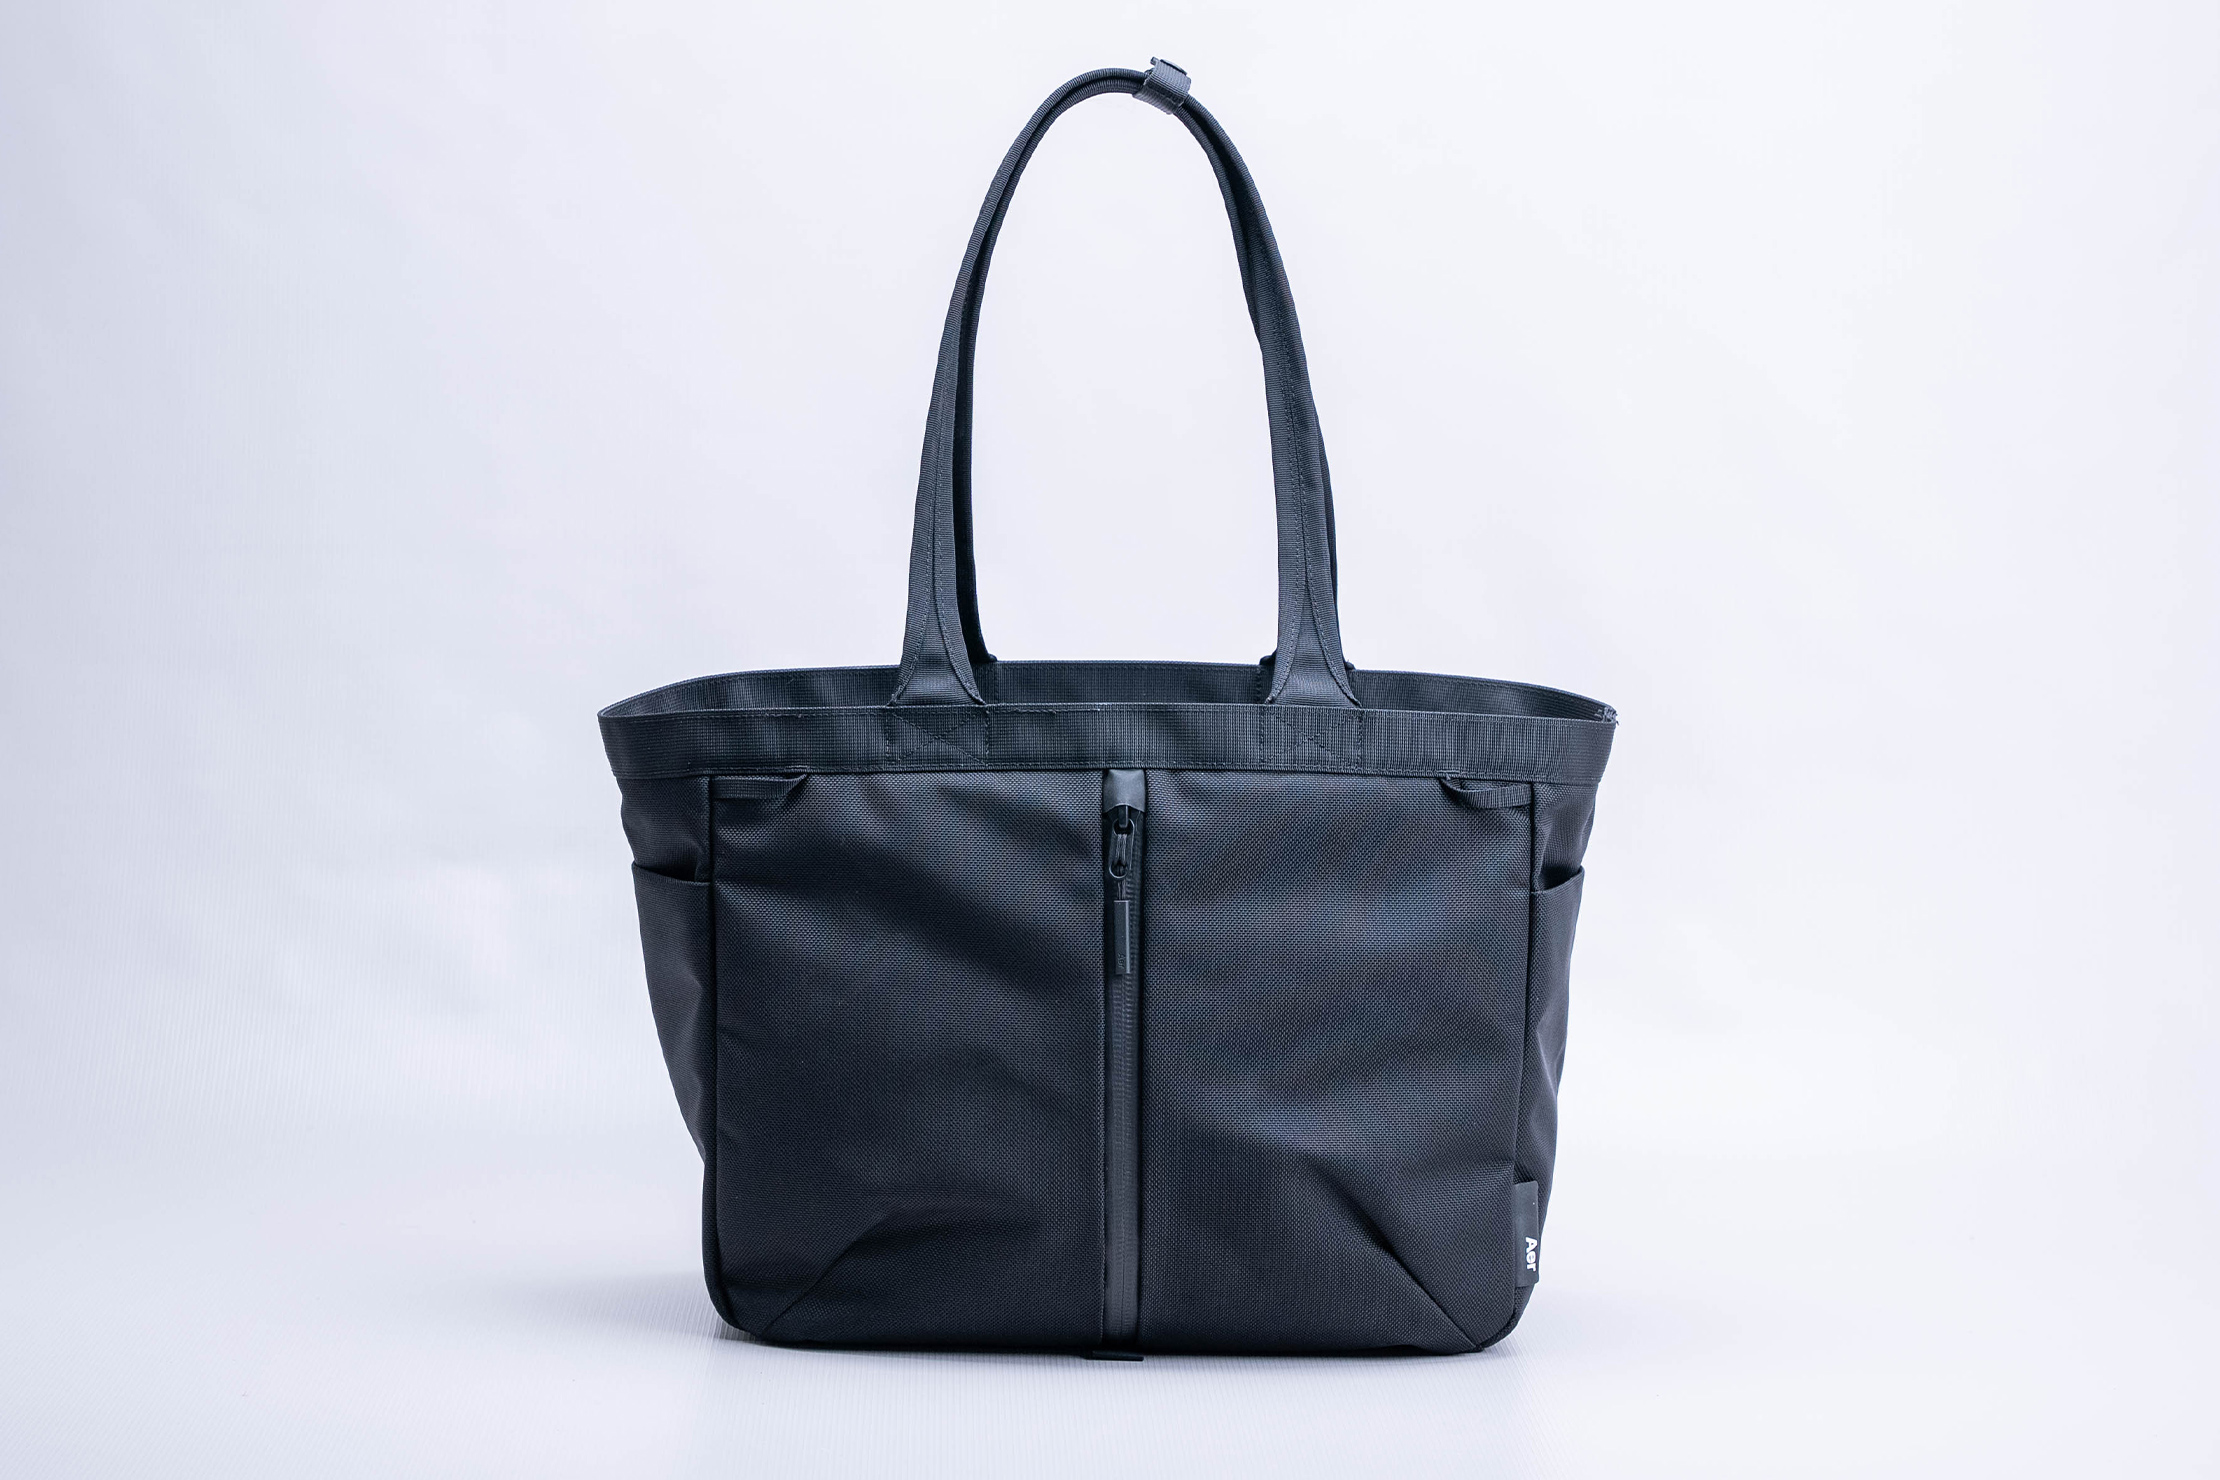 Aer City Tote Review | Pack Hacker